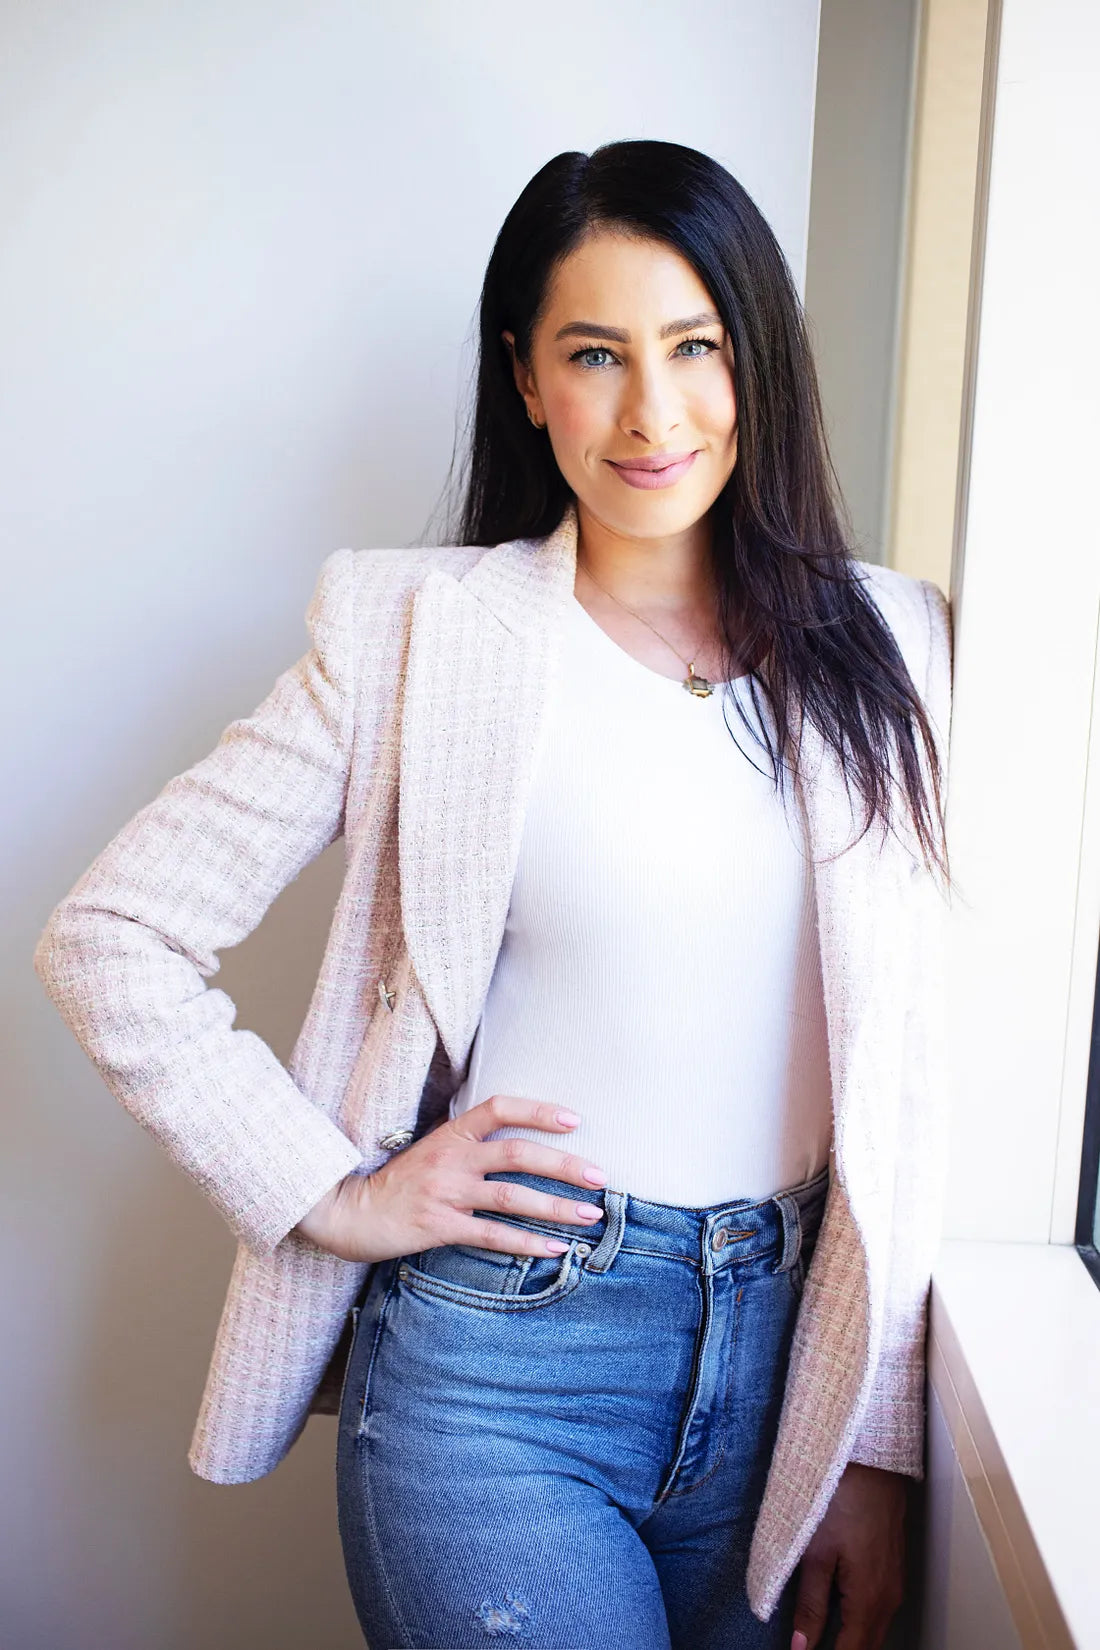 Women In Wellness: Natalie Jambazian Of Sherman Oaks Therapy On The Five Lifestyle Tweaks That Will Help Support People’s Journey Towards Better Wellbeing